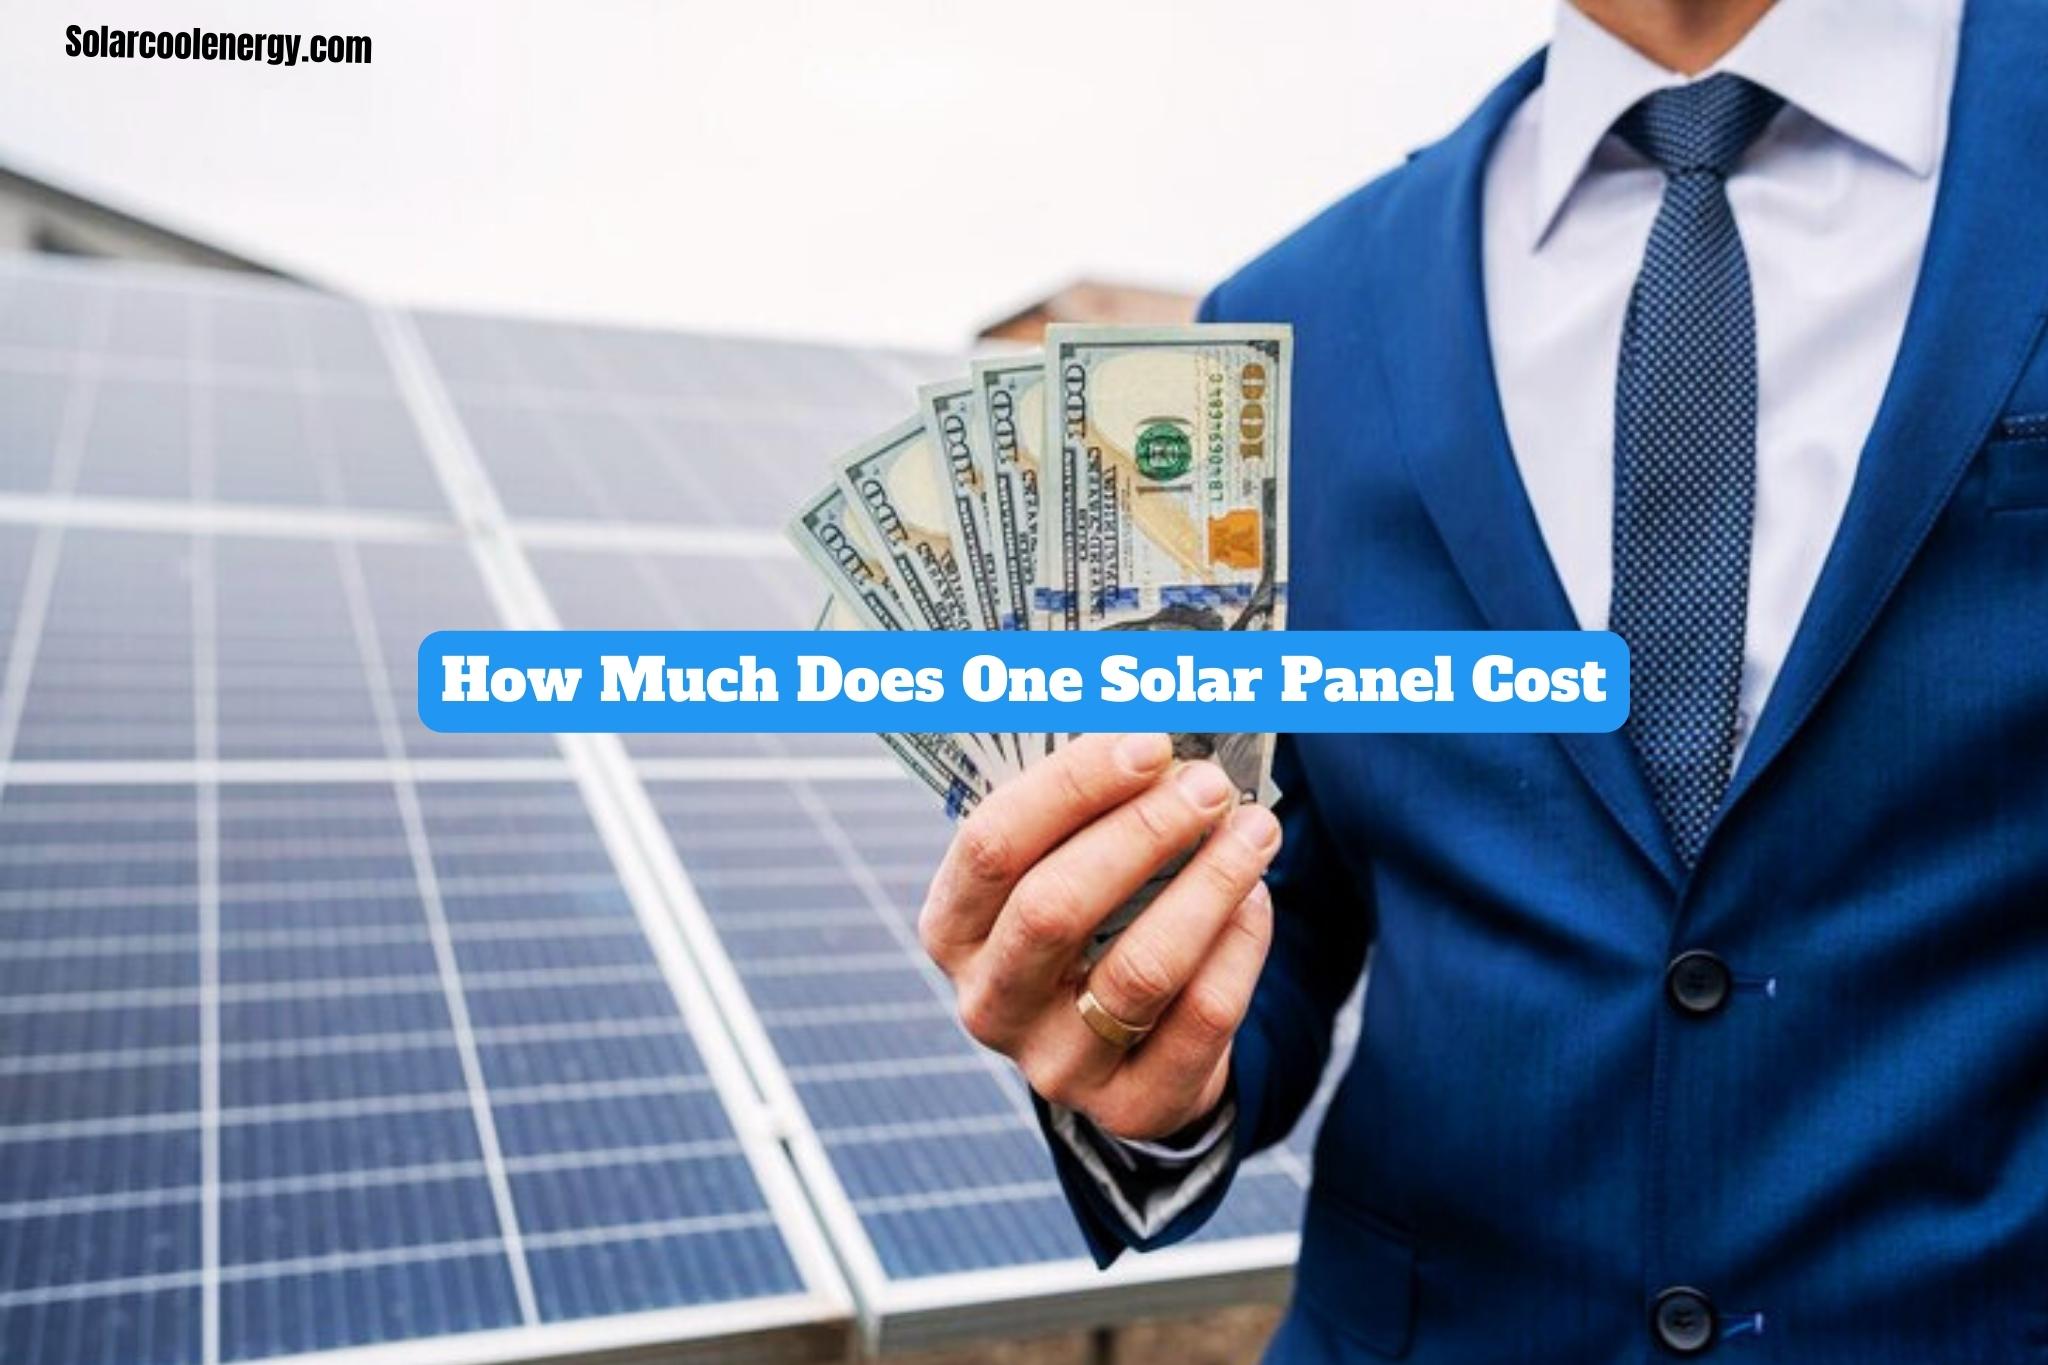 How Much Does One Solar Panel Cost